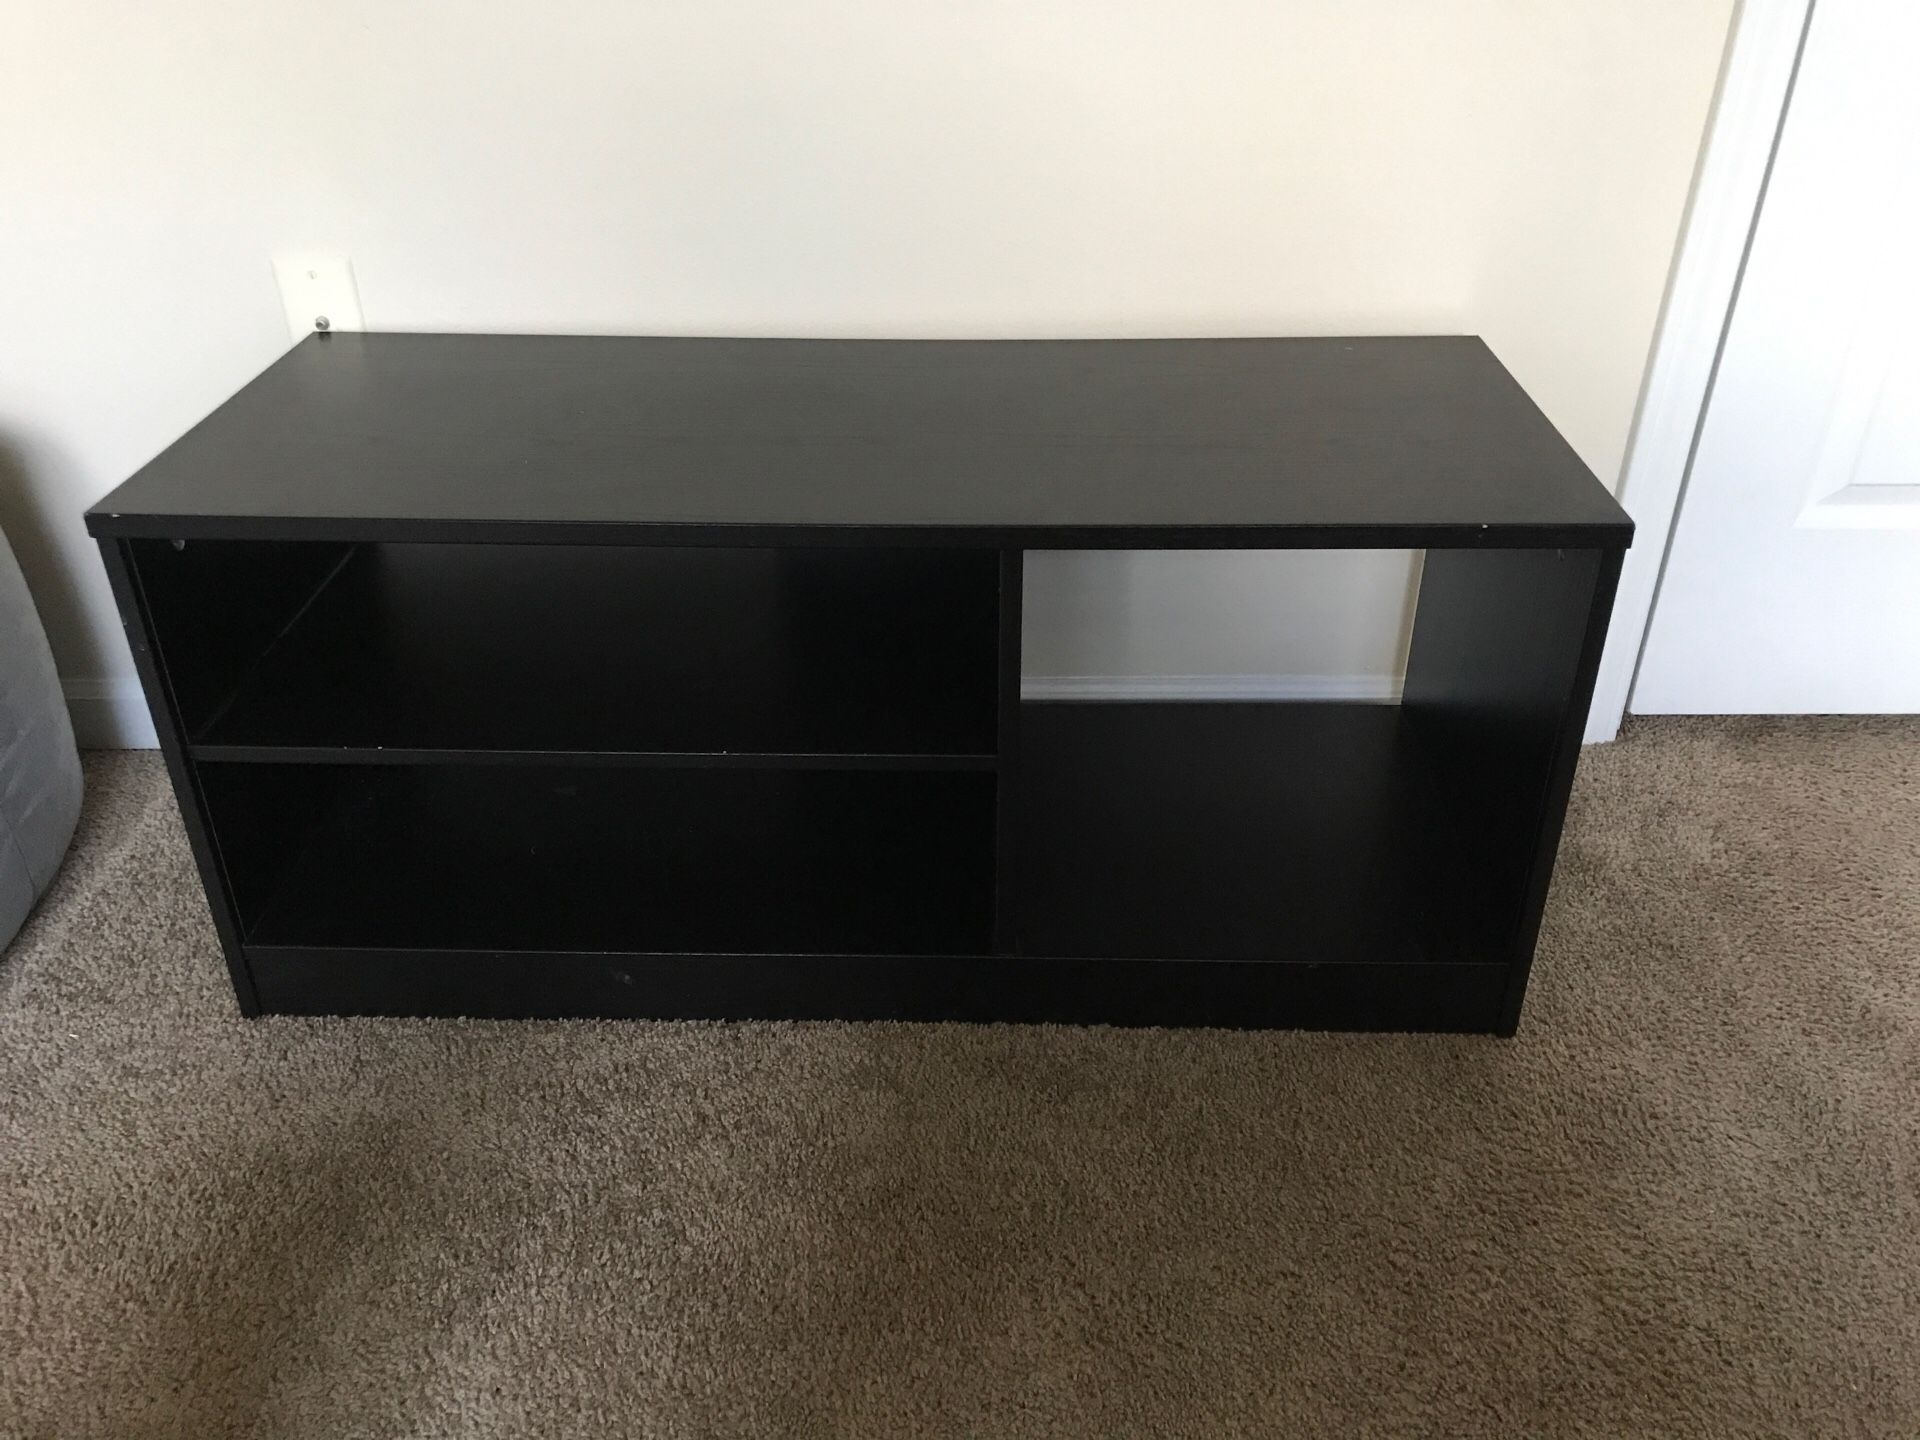 Desk and tv stand